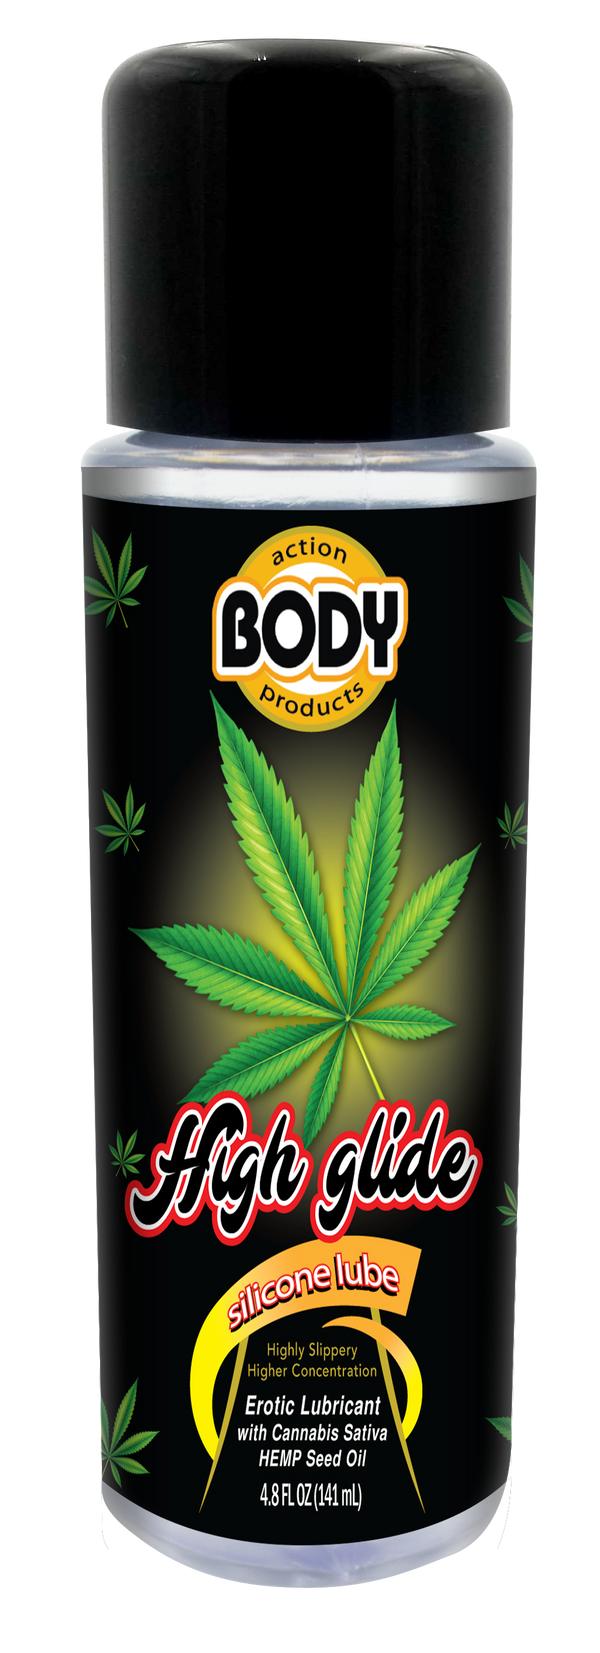 Body Action Products High Glide Erotic Lubricant 4.8 Oz Bottle from Body Action at $24.99